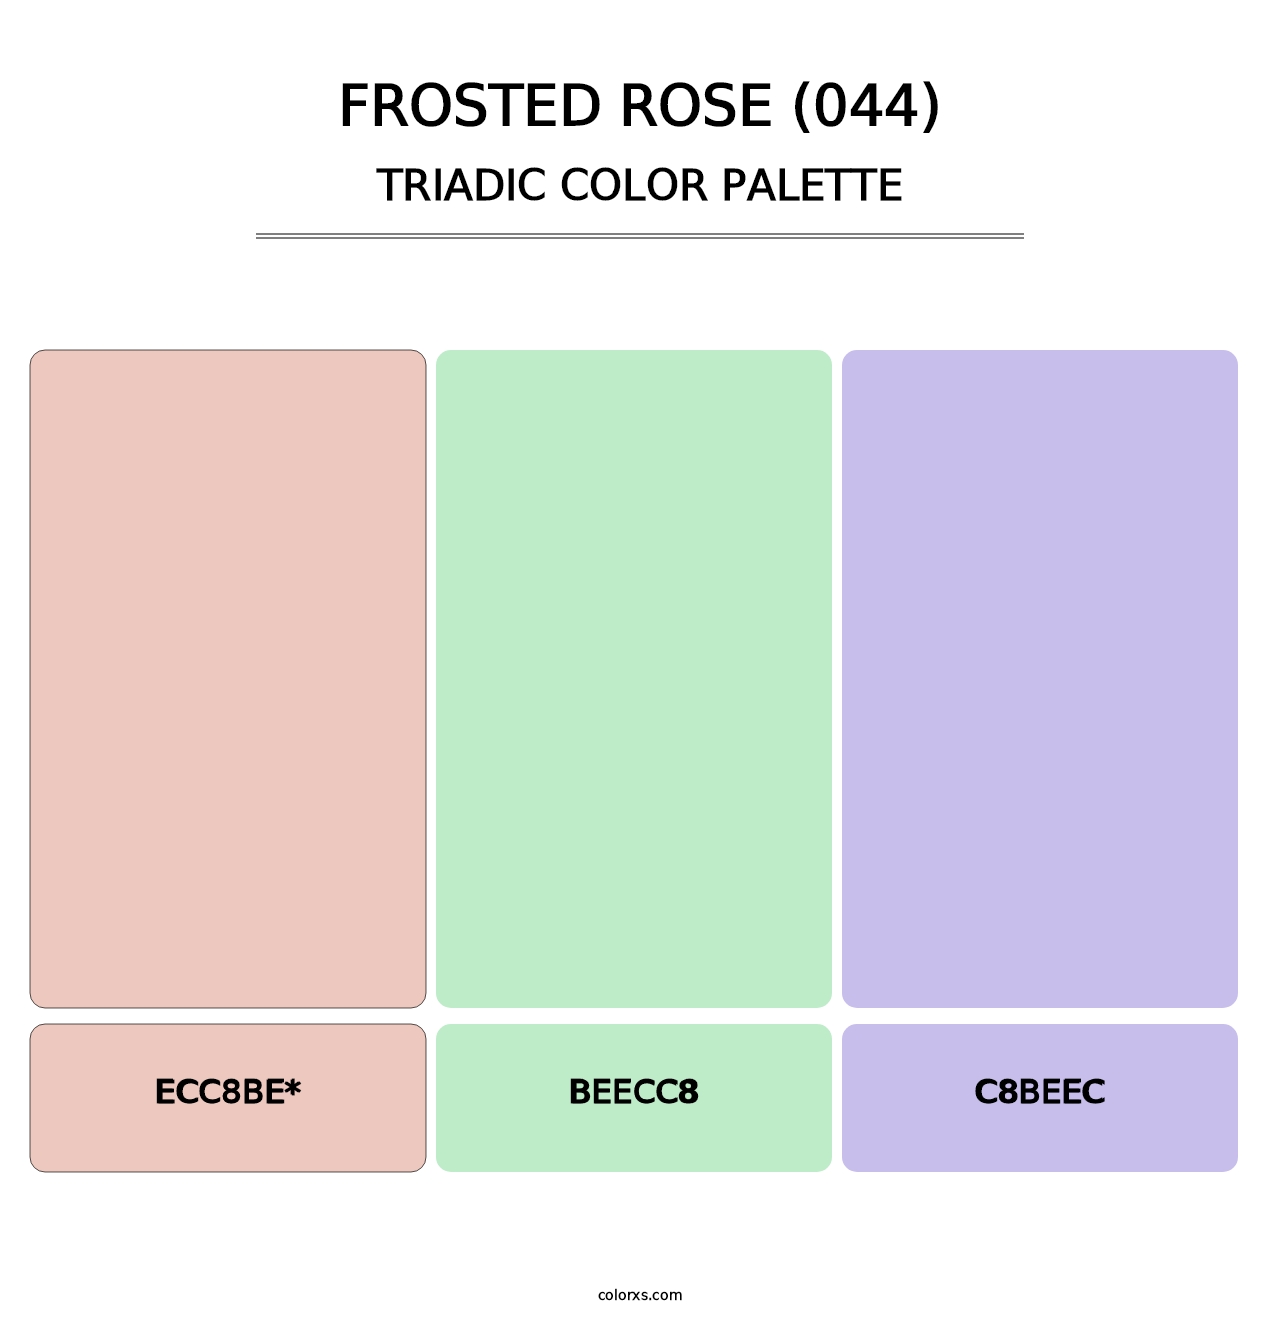 Frosted Rose (044) - Triadic Color Palette